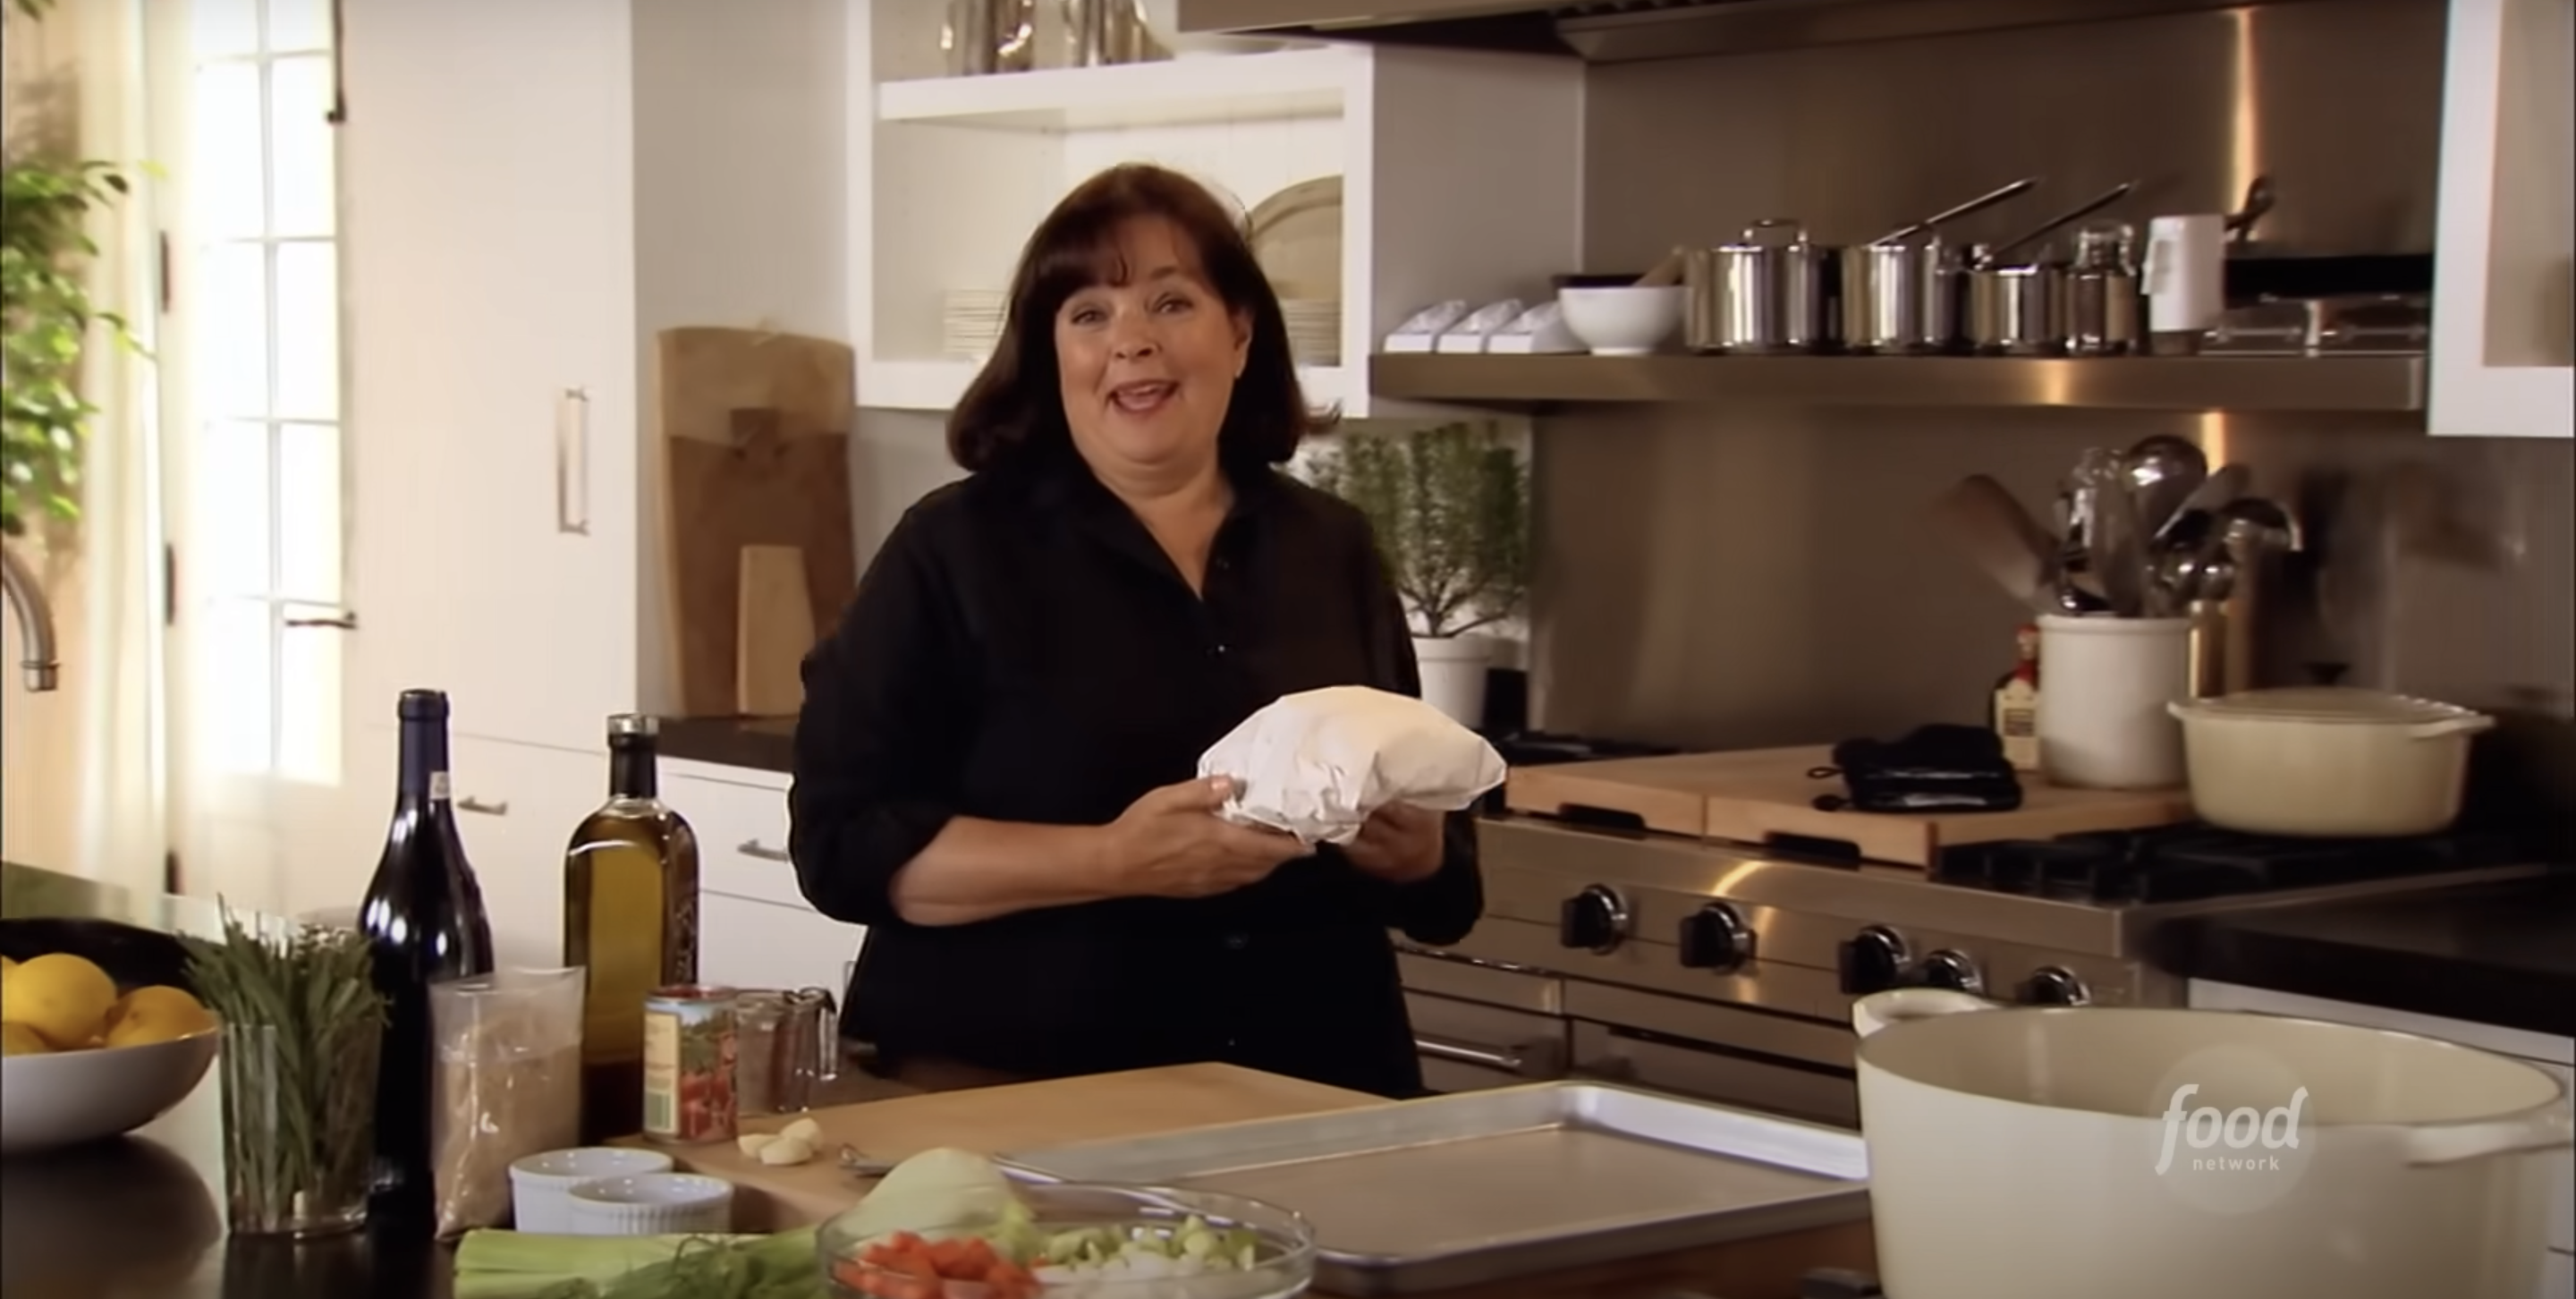 Ina Garten in a kitchen holding a cloth-wrapped item, with ingredients and cookware on the countertop